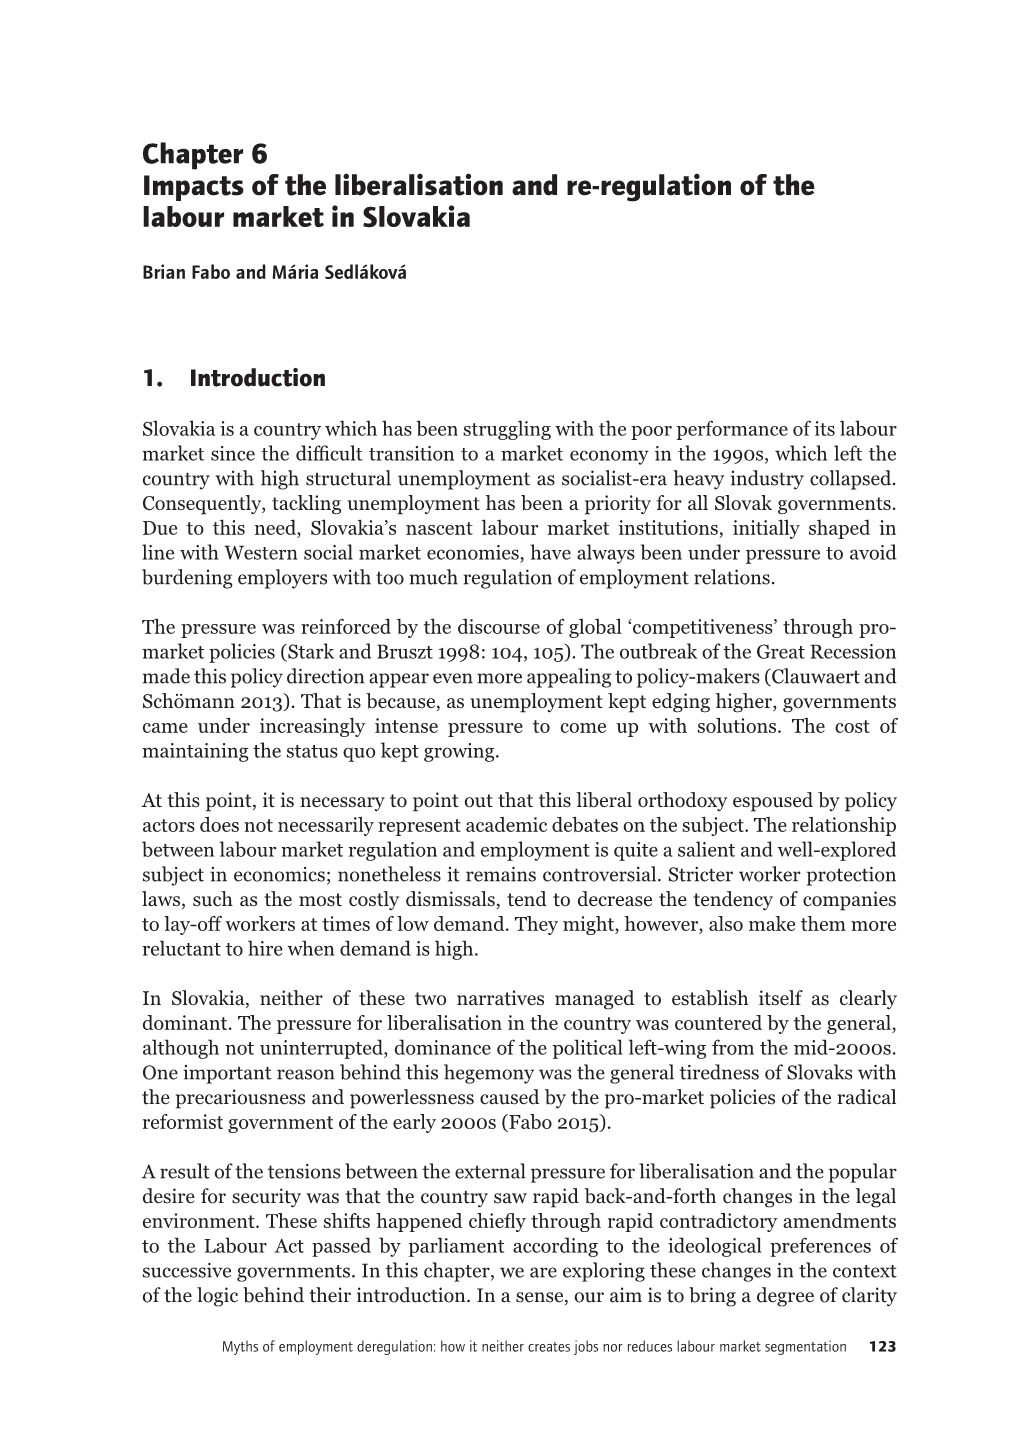 Chapter 6 Impacts of the Liberalisation and Re-Regulation of the Labour Market in Slovakia